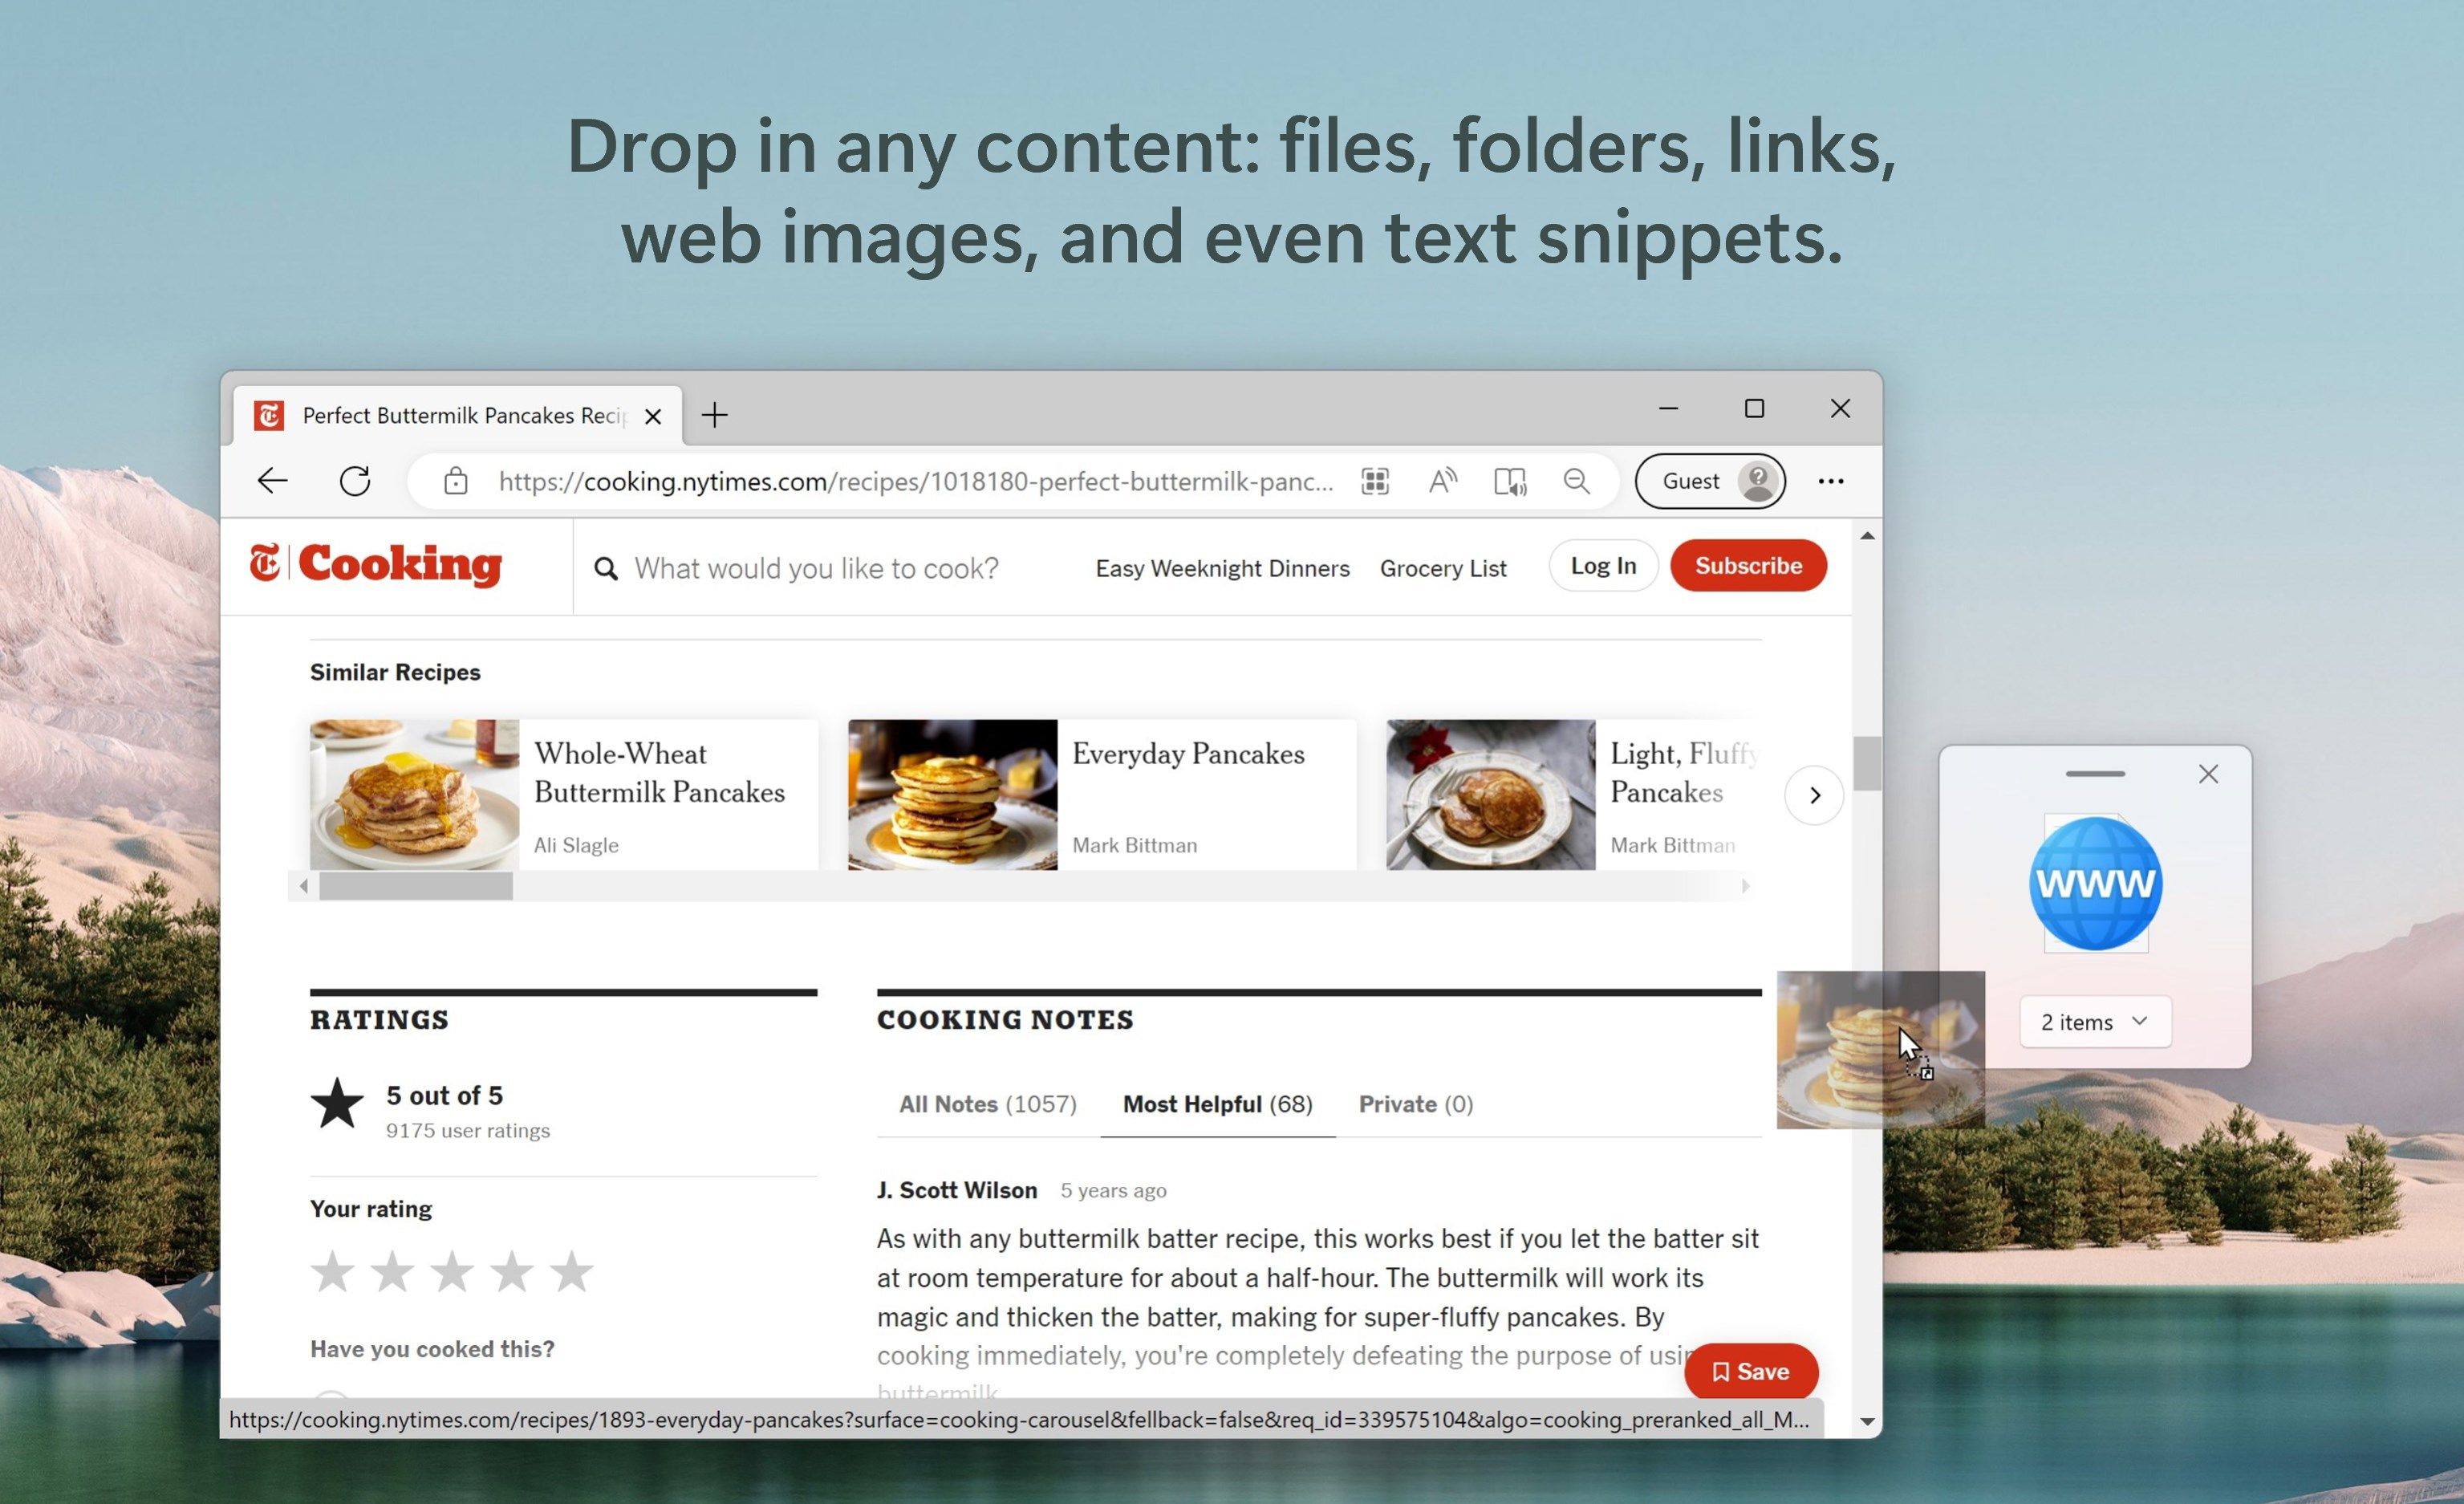 Drop in any content: files, folders, links, web images, and even text snippets.